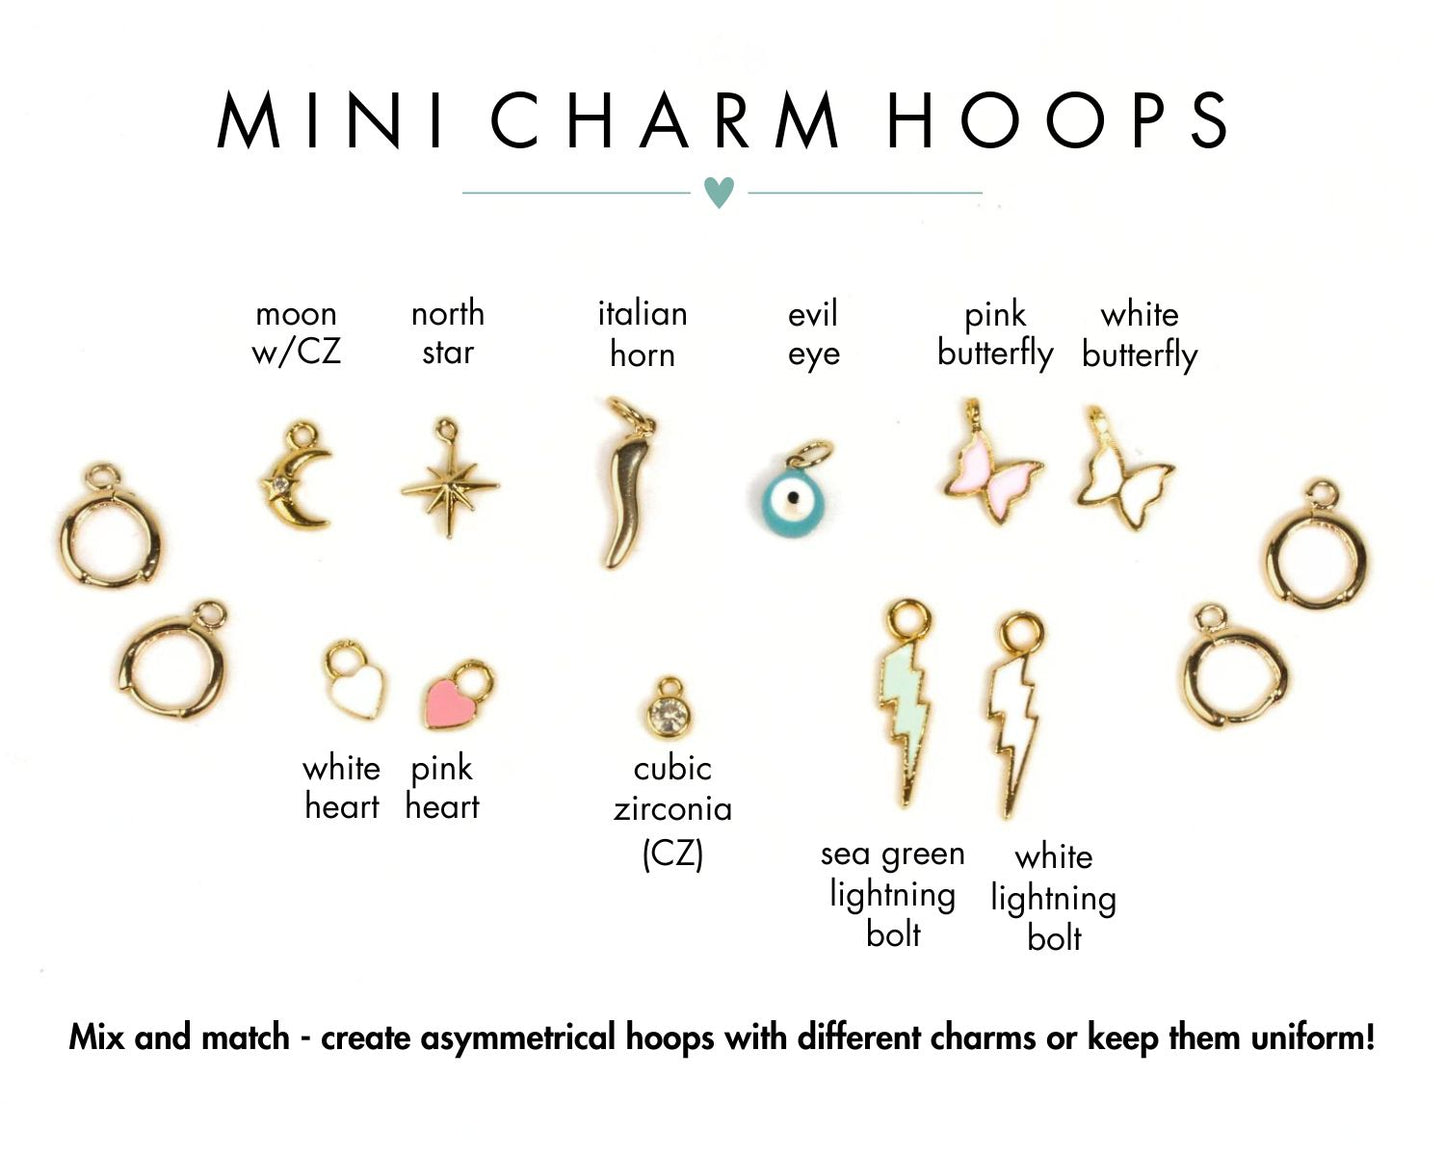 mix and match different charms or keep them uniform.